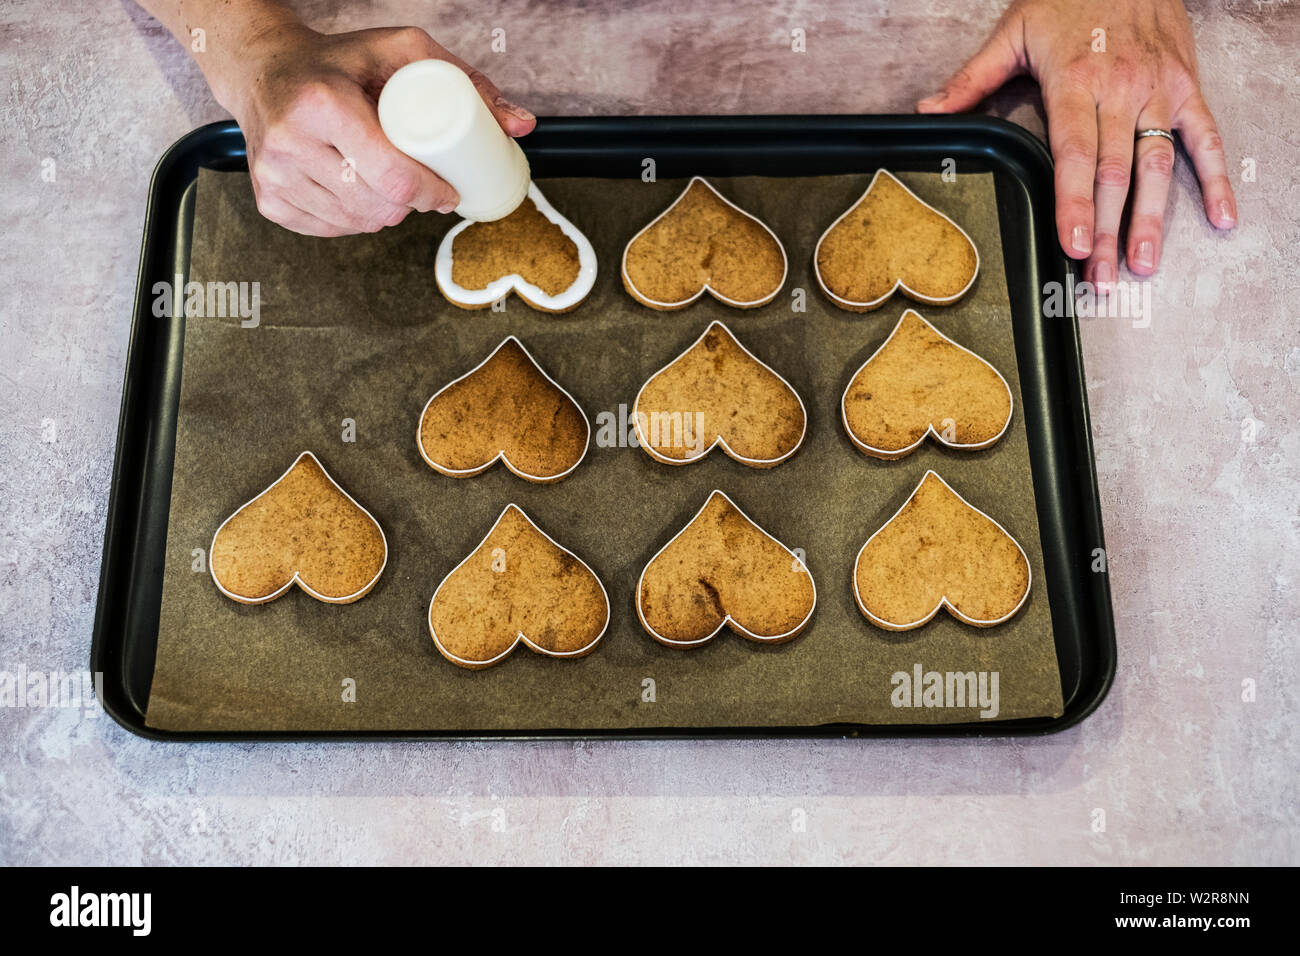 High angle close up of person decorating freshly baked hart-shaped cookies with piped white icing, flood icing technique. Stock Photo